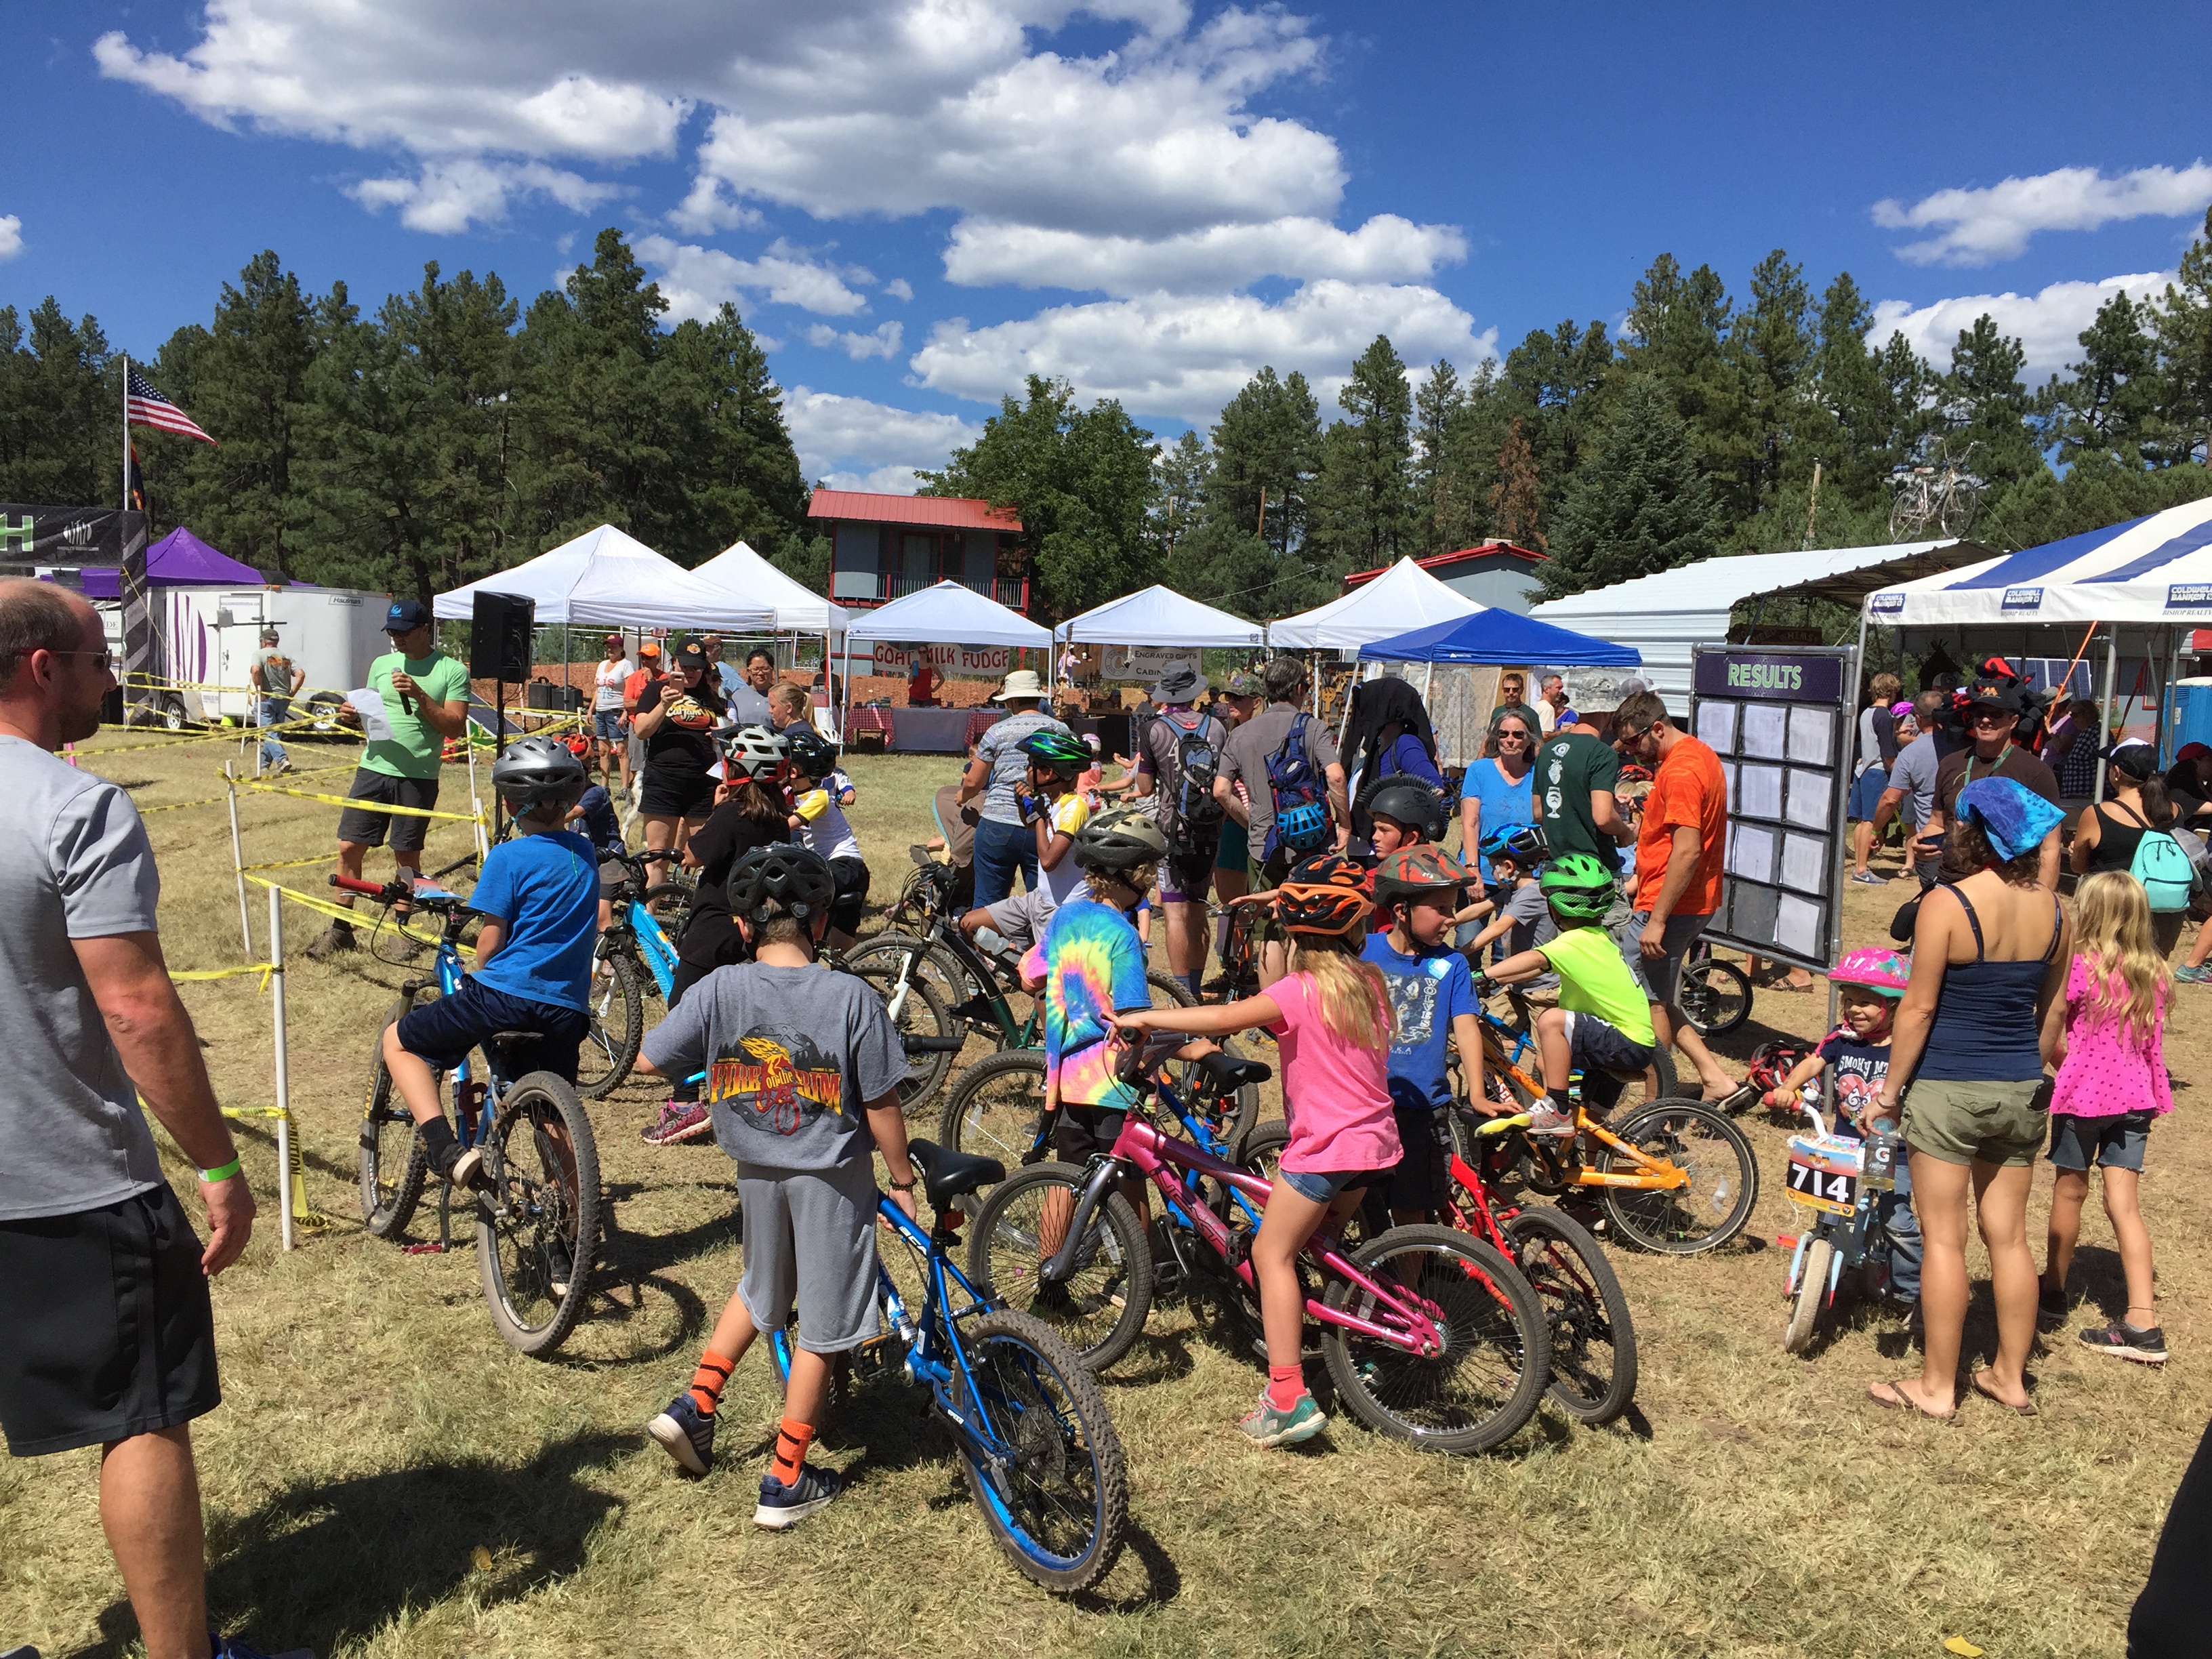 Bike safety booth and helmet giveaway during Fire on the Rim ride in Pine, Arizona in Sept 2018. Source: John Boyd